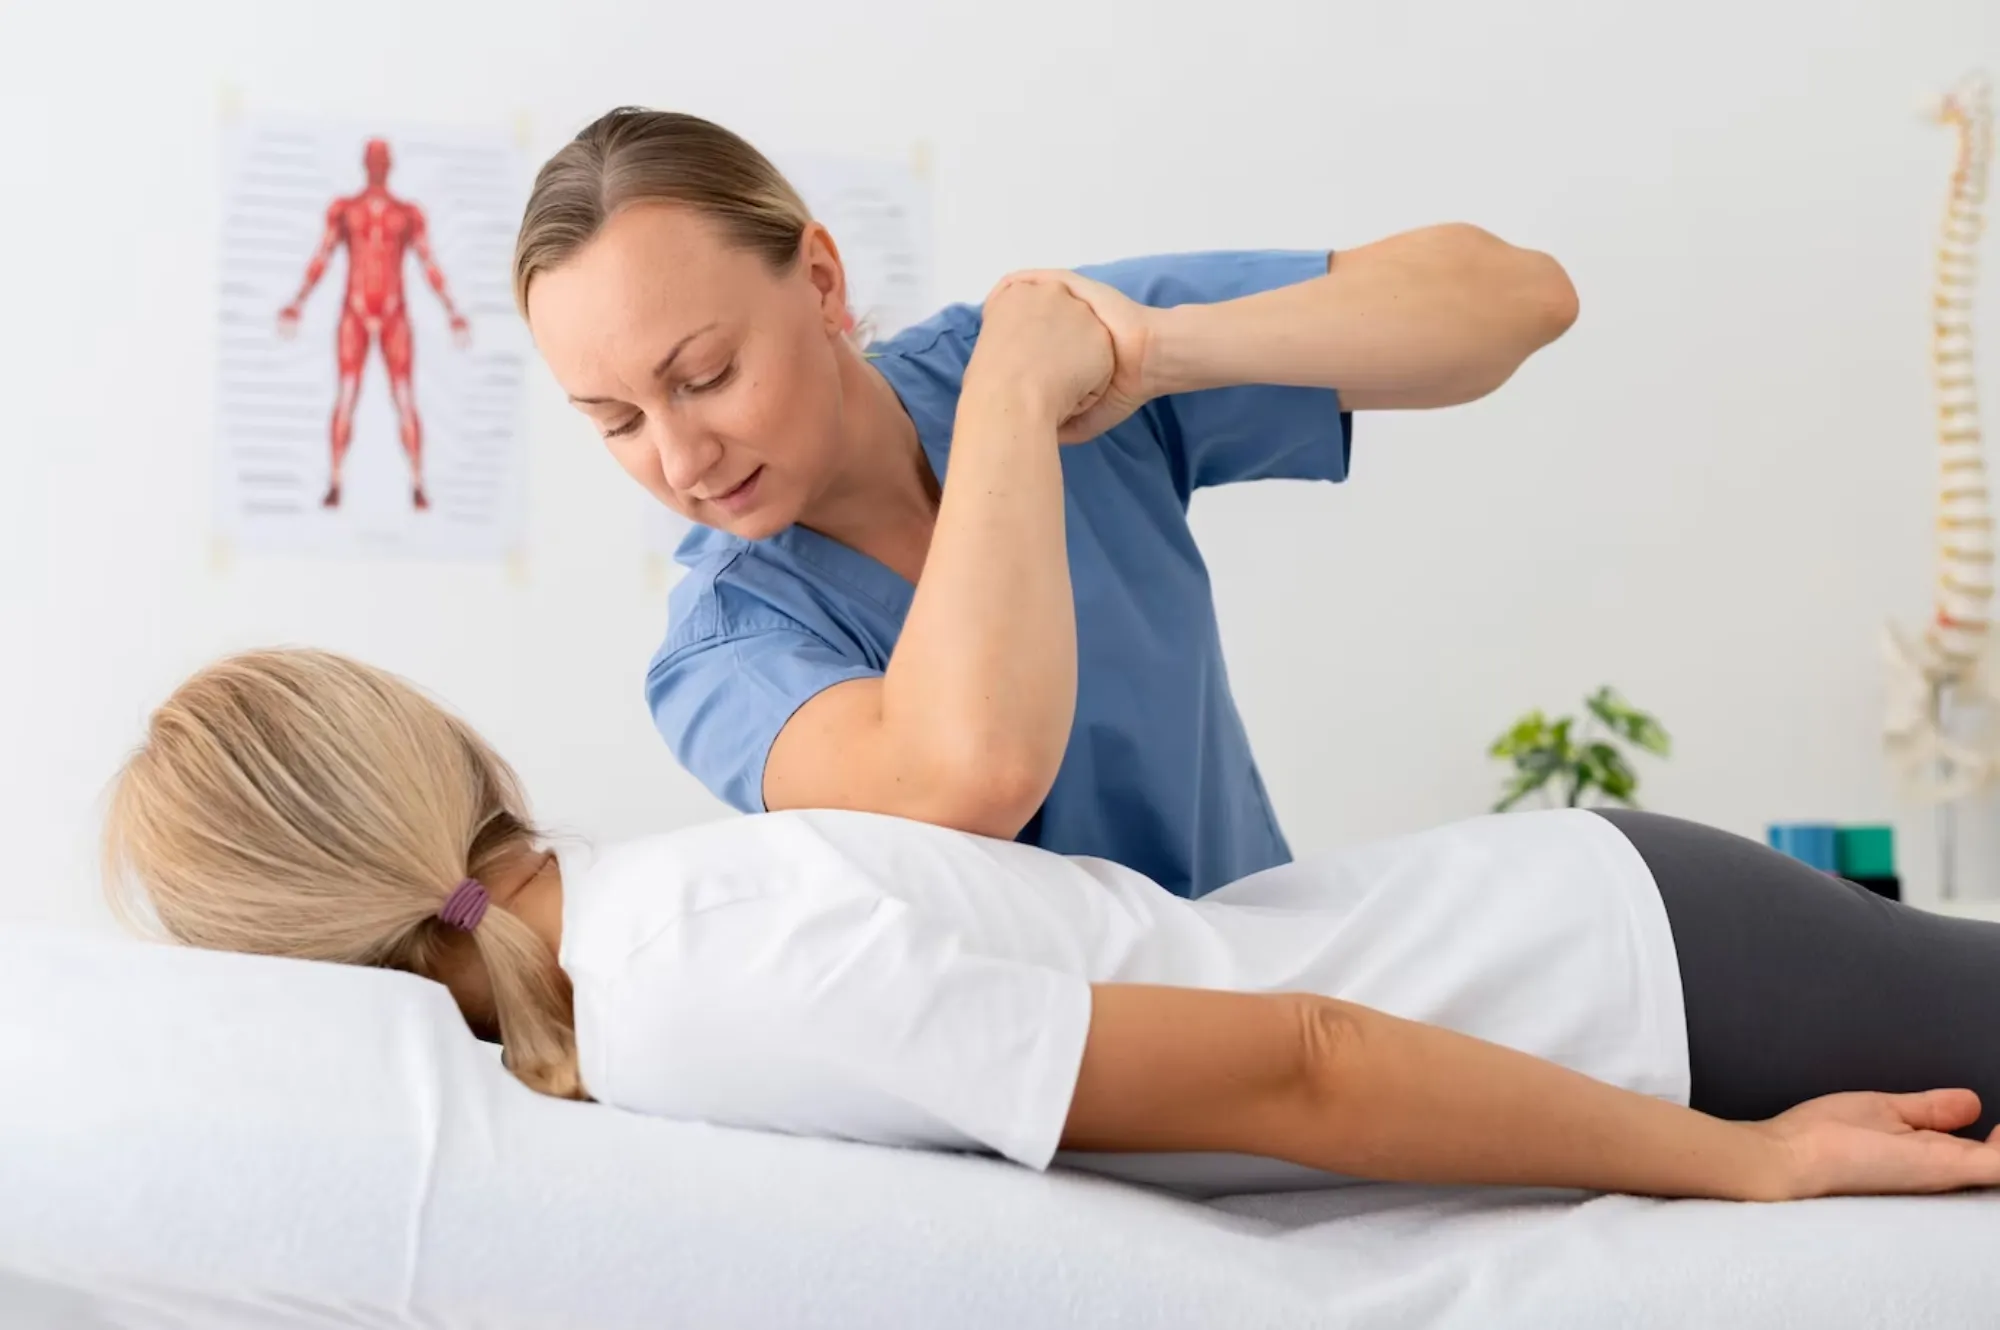 Treating Sacroiliitis with Chiropractic Care